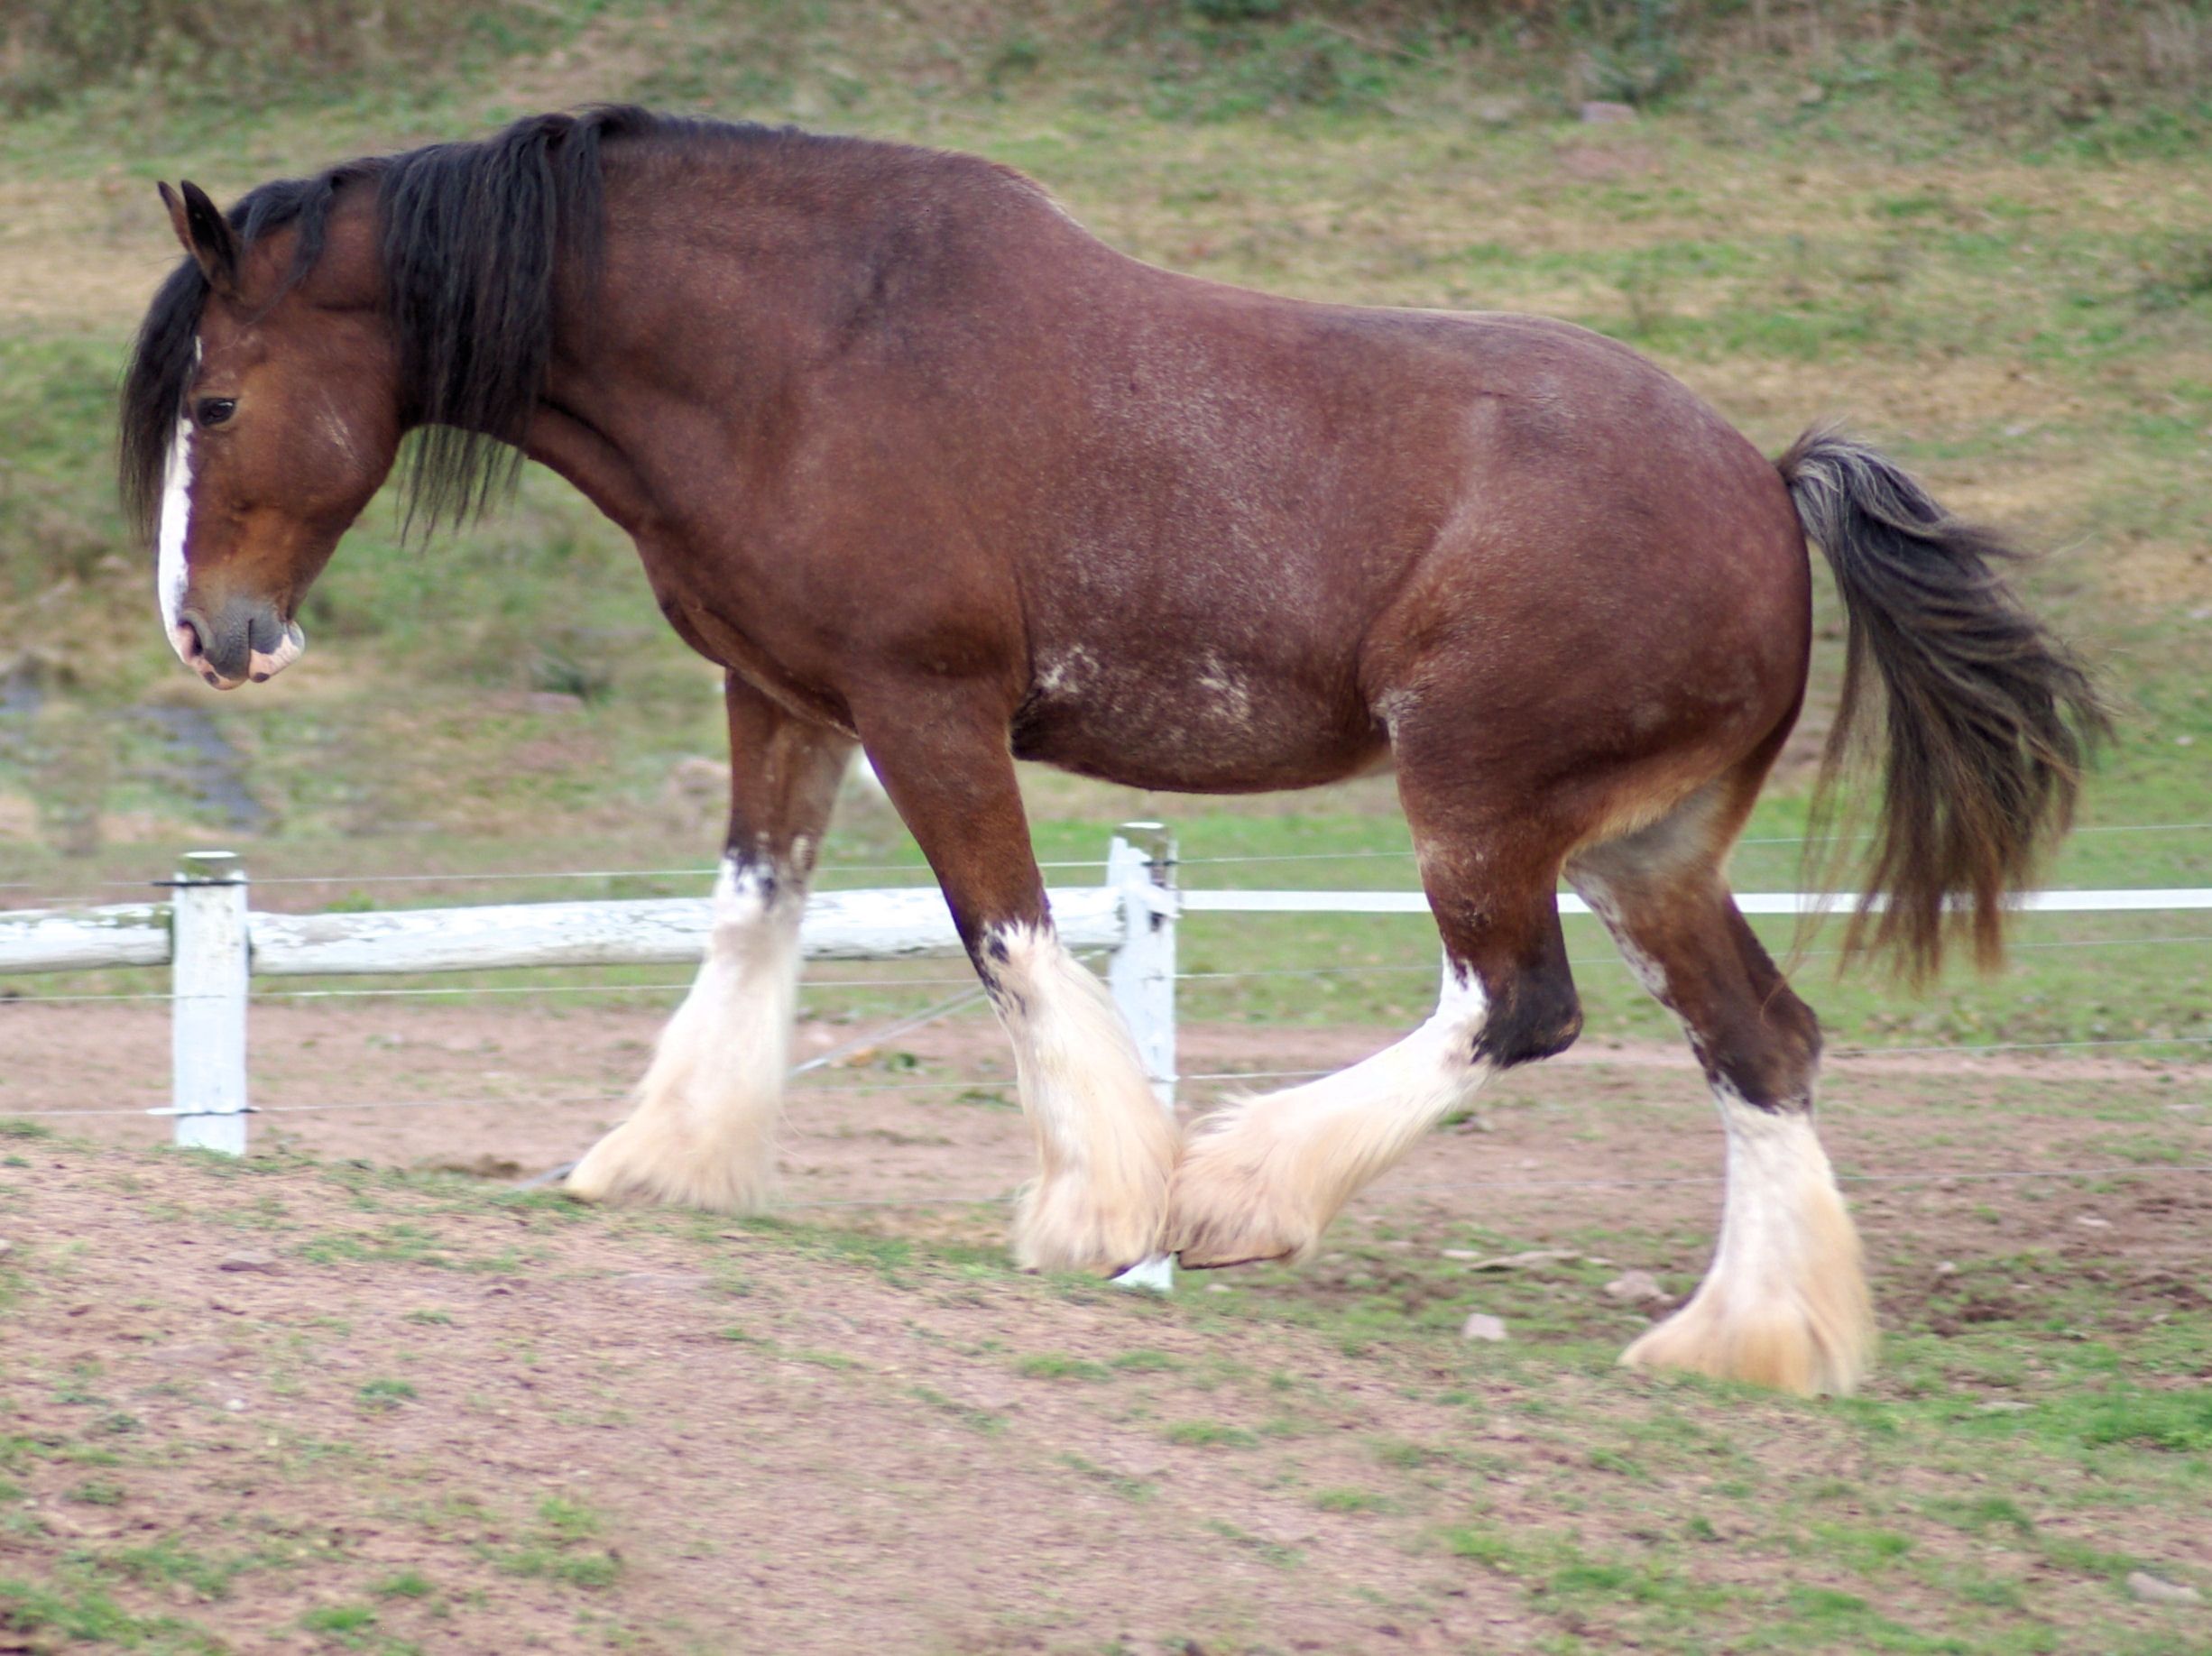 Clydesdale horse | EQUINE - Draft - Gentle Giants | Pinterest ...